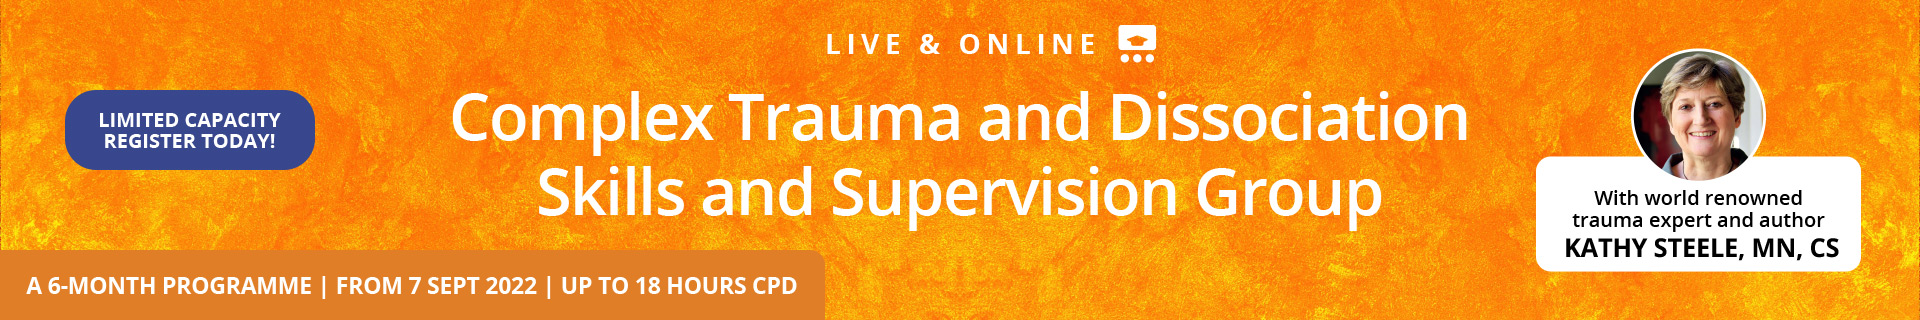 Complex Trauma and Dissociation Skills and Supervision Group